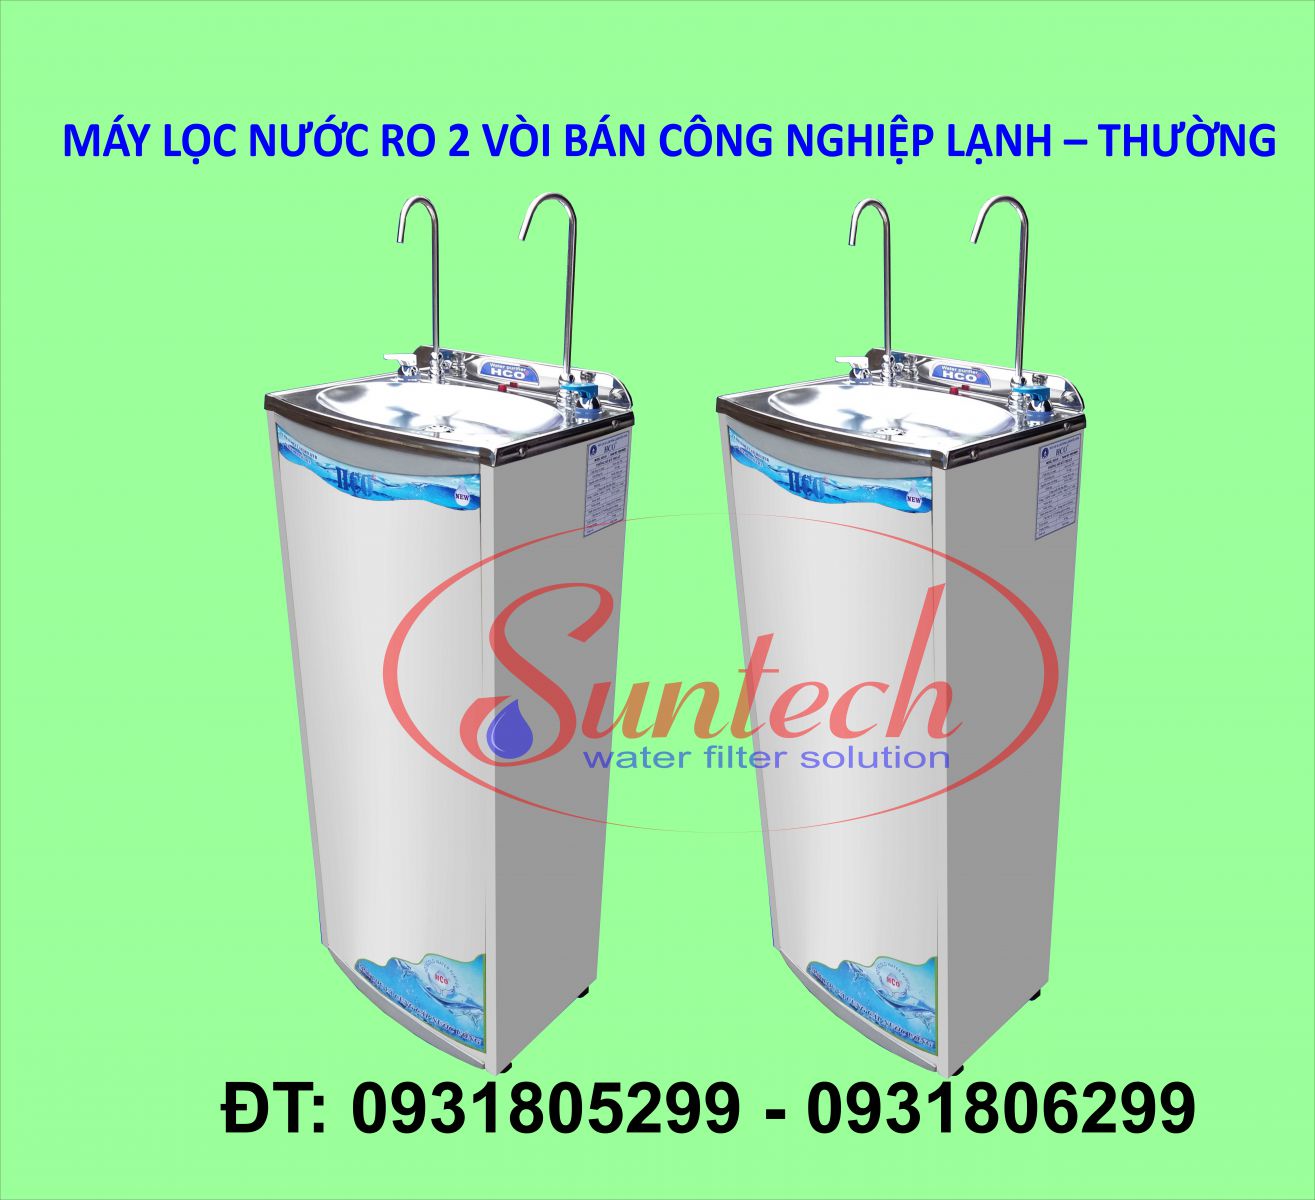 may-loc-nuoc-ro-2-voi-ban-cong-nghiep-lanh-thuong